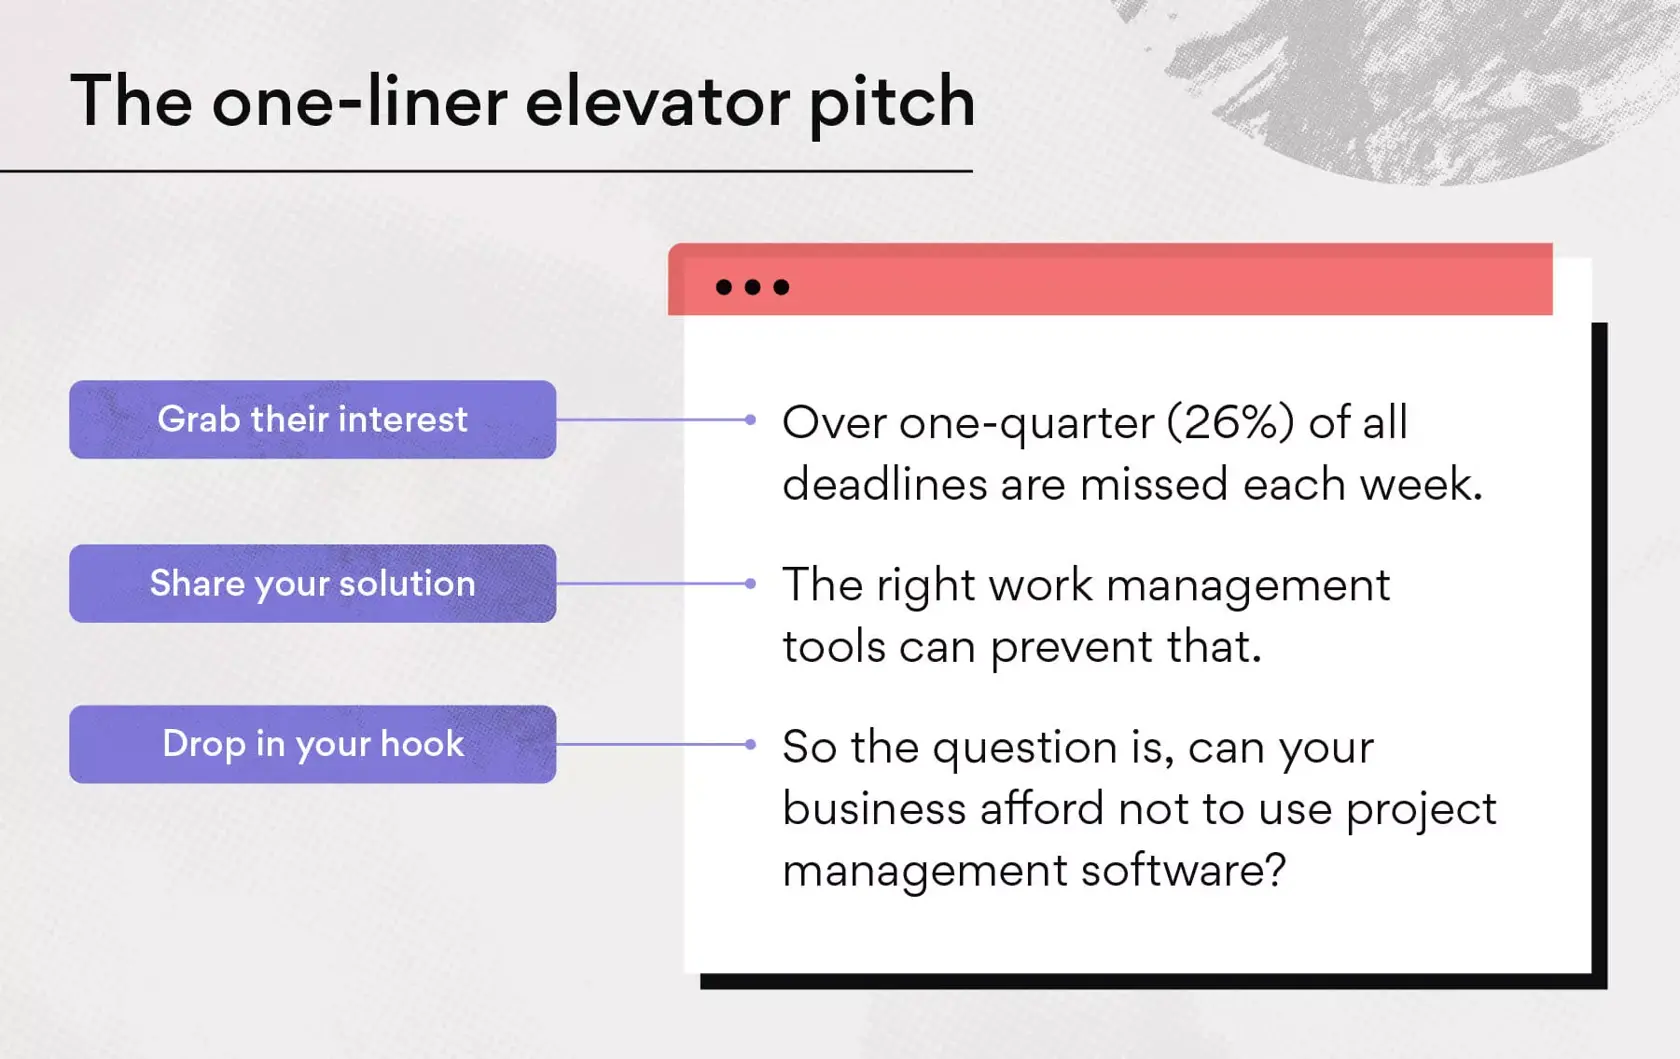 The one-liner elevator pitch